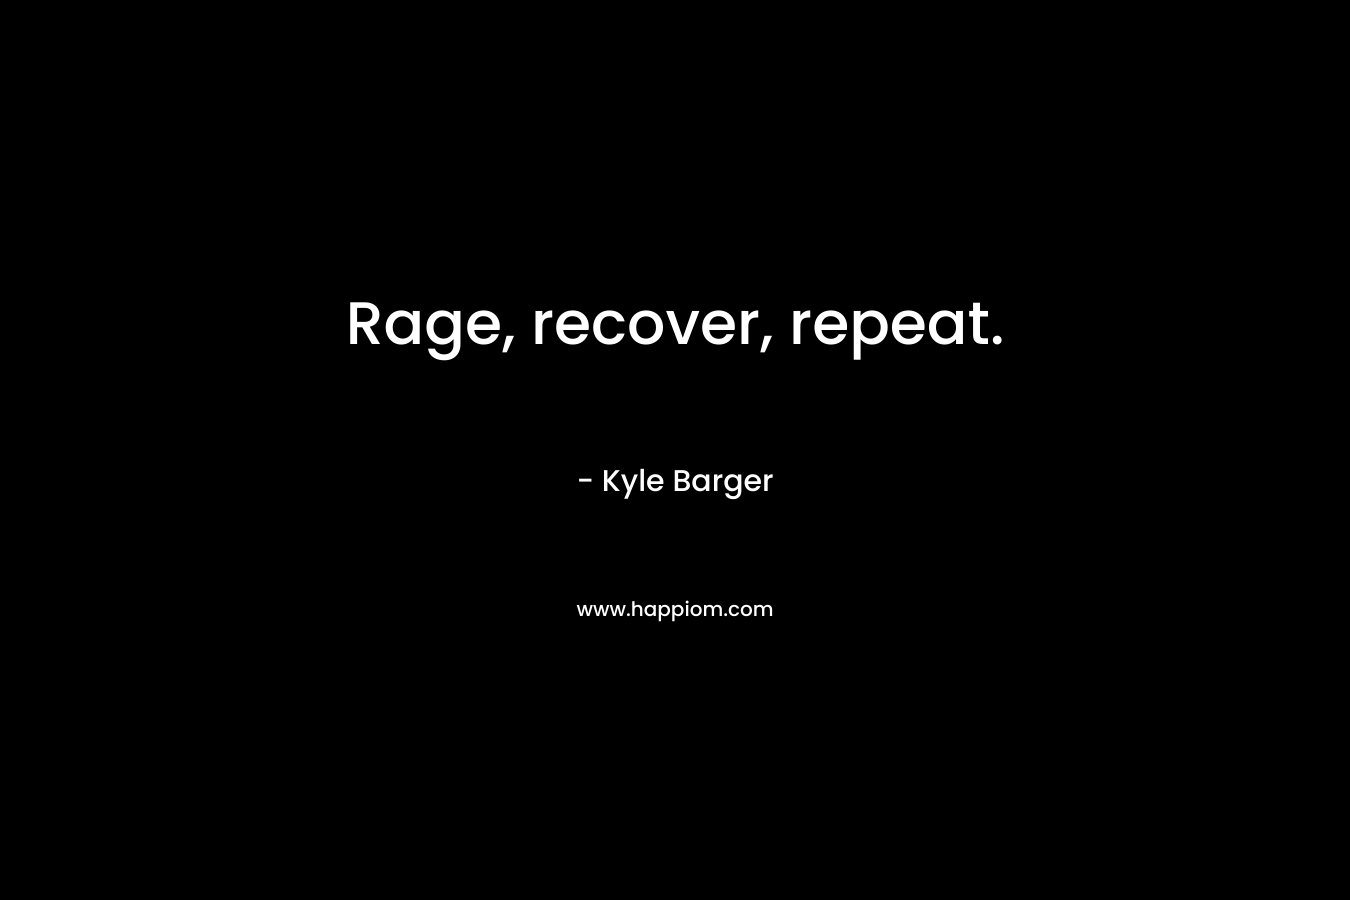 Rage, recover, repeat.